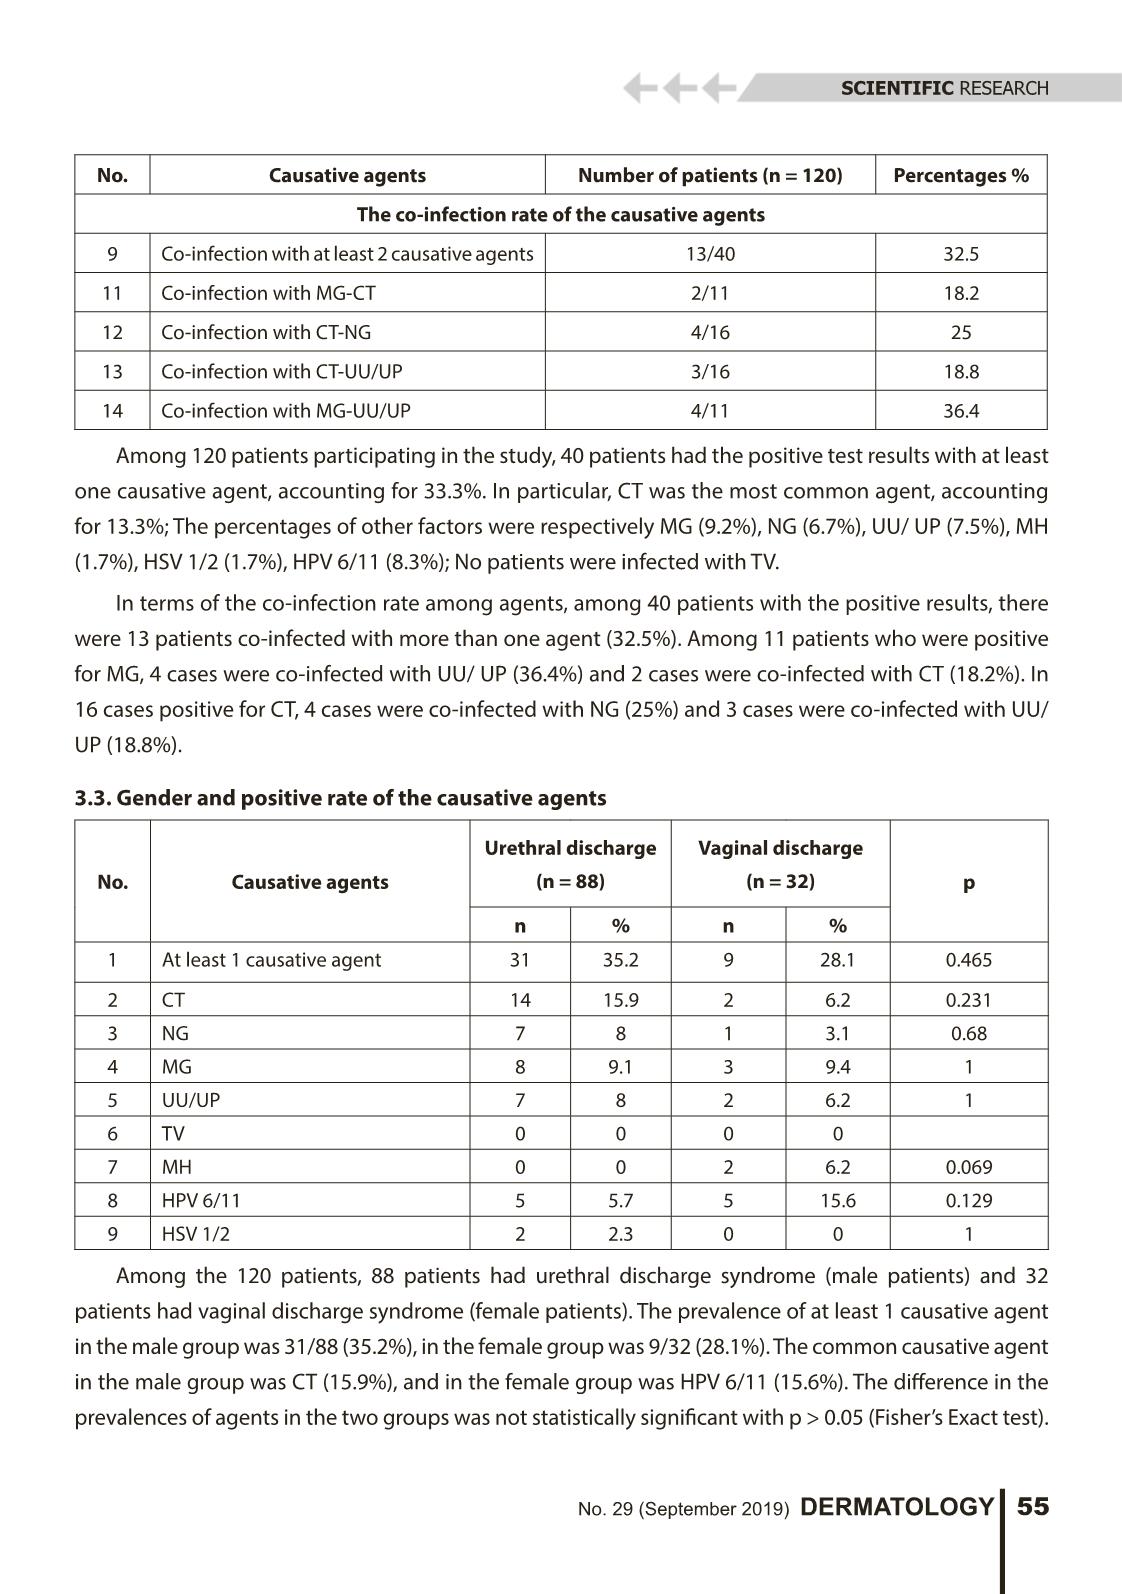 The positive rate with the common sexually transmitted agents and some relevant factors of the patients with urethral/vaginal discharge syndrome trang 4